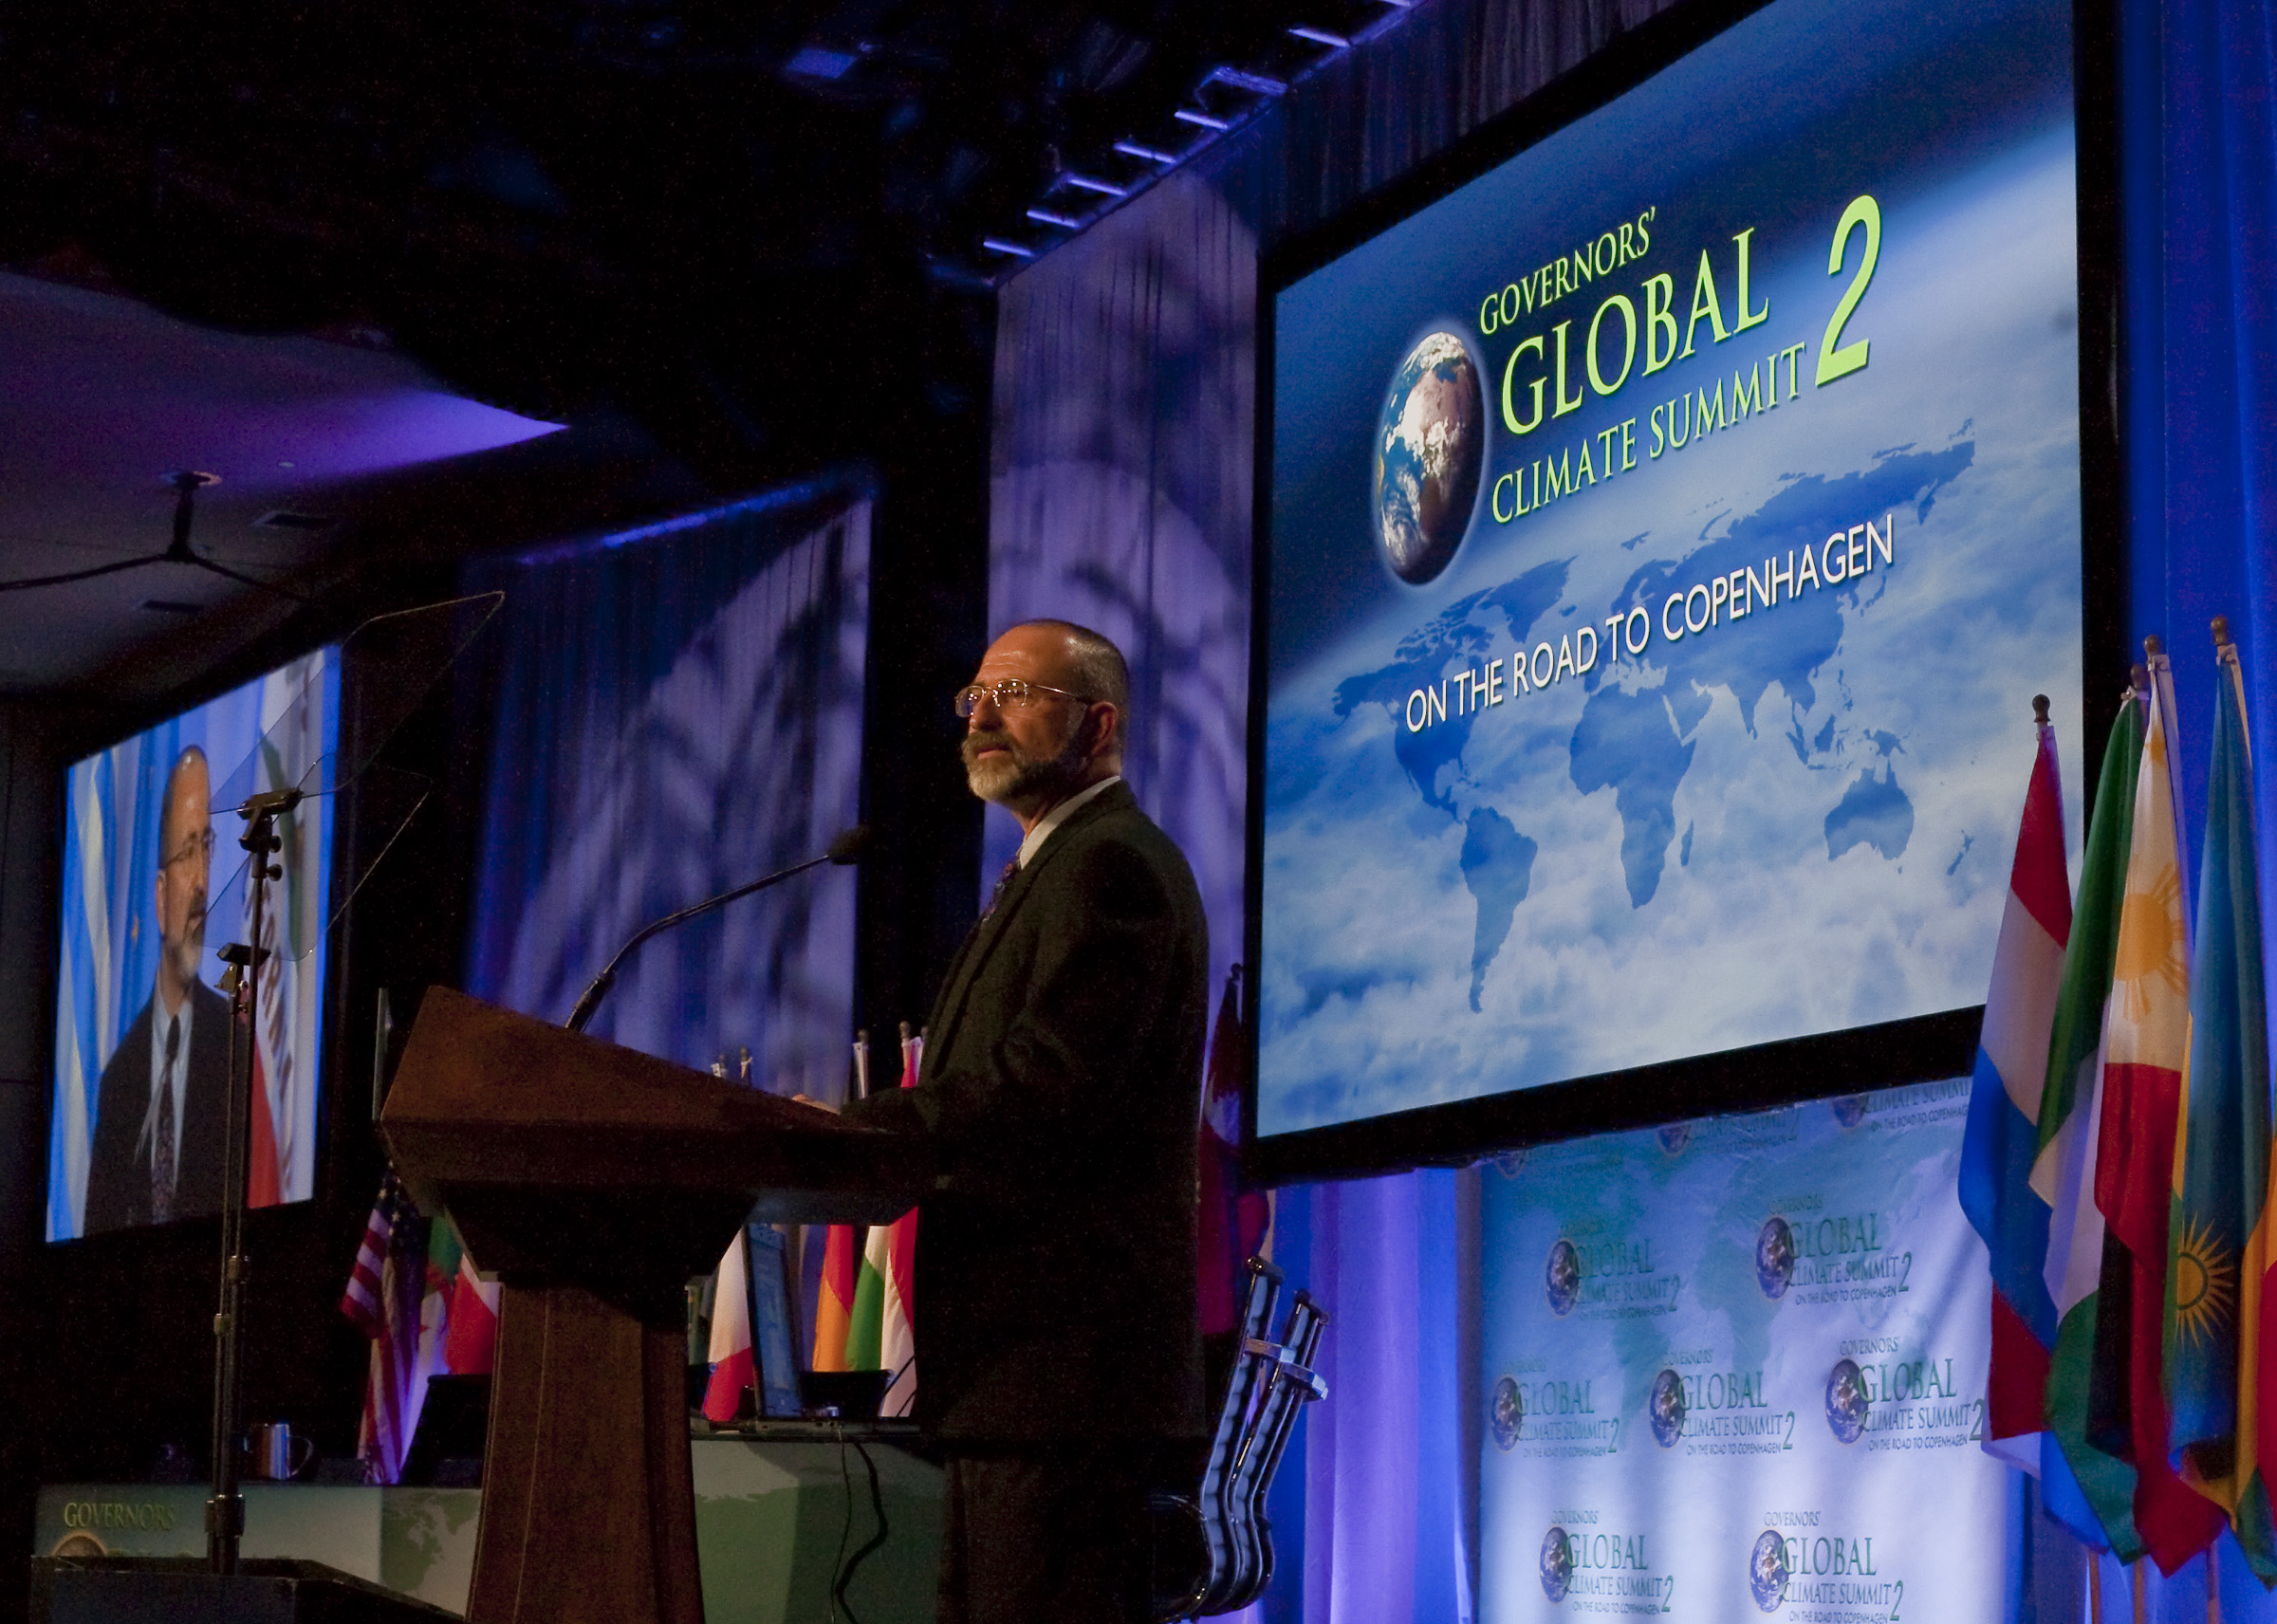 An assortment of luminaries attended the Governors’ Global Climate Summit earlier this month, ranging from Arnold Schwarzenegger to Tony Blair to Harrison Ford. NASA Jet Propulsion Laboratory’s very own Kevin Hussey (pictured) was there to preview our interactive tool.